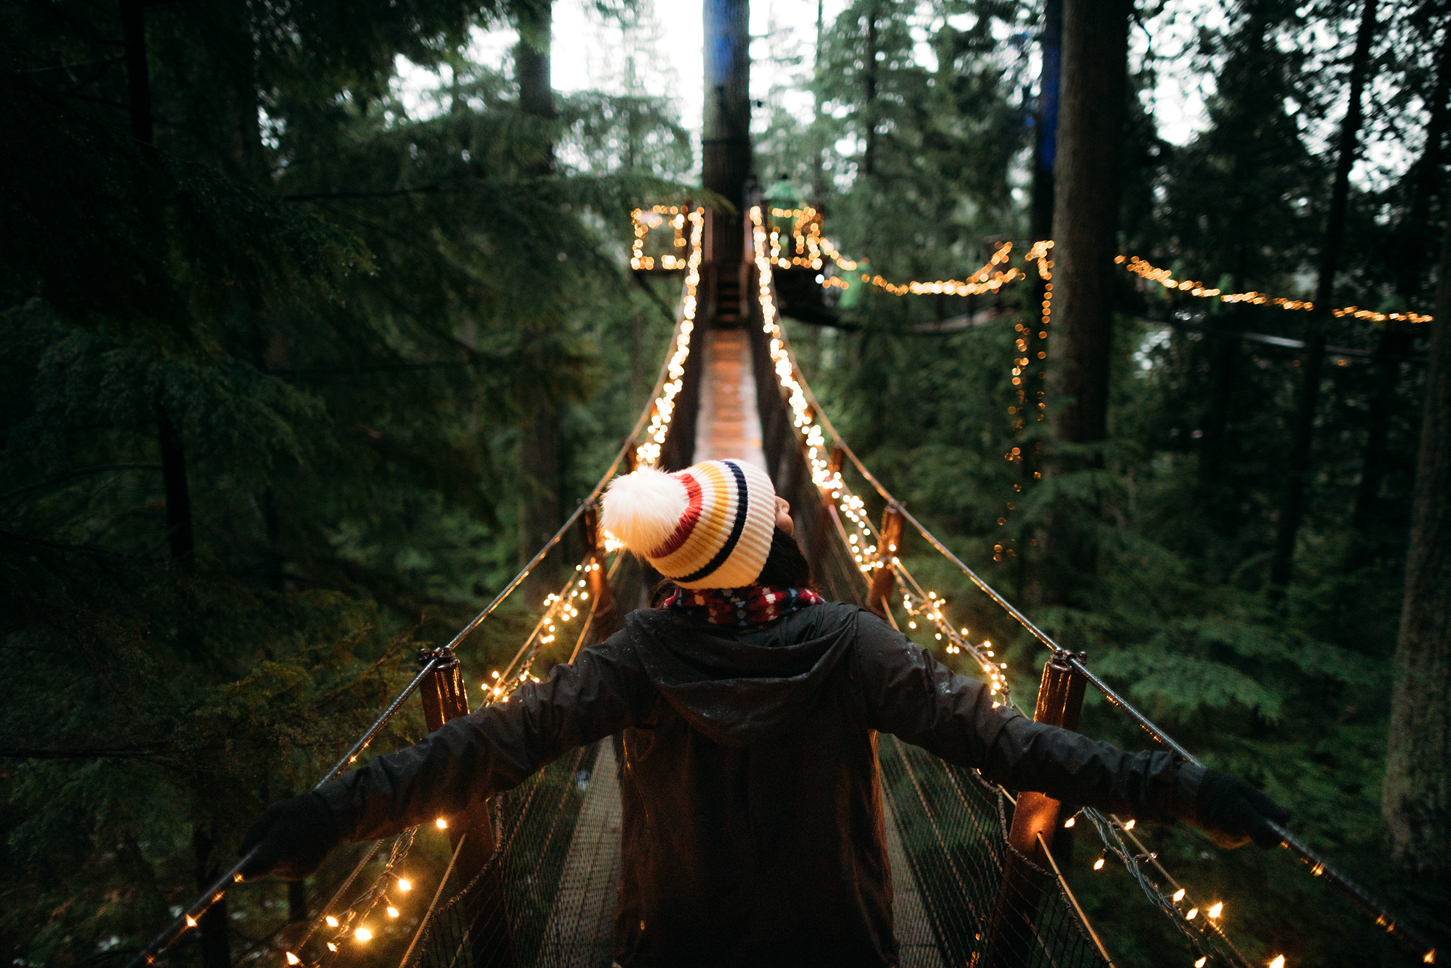 Canyon Lights at the Capilano Suspension Bridge in North Vancouver